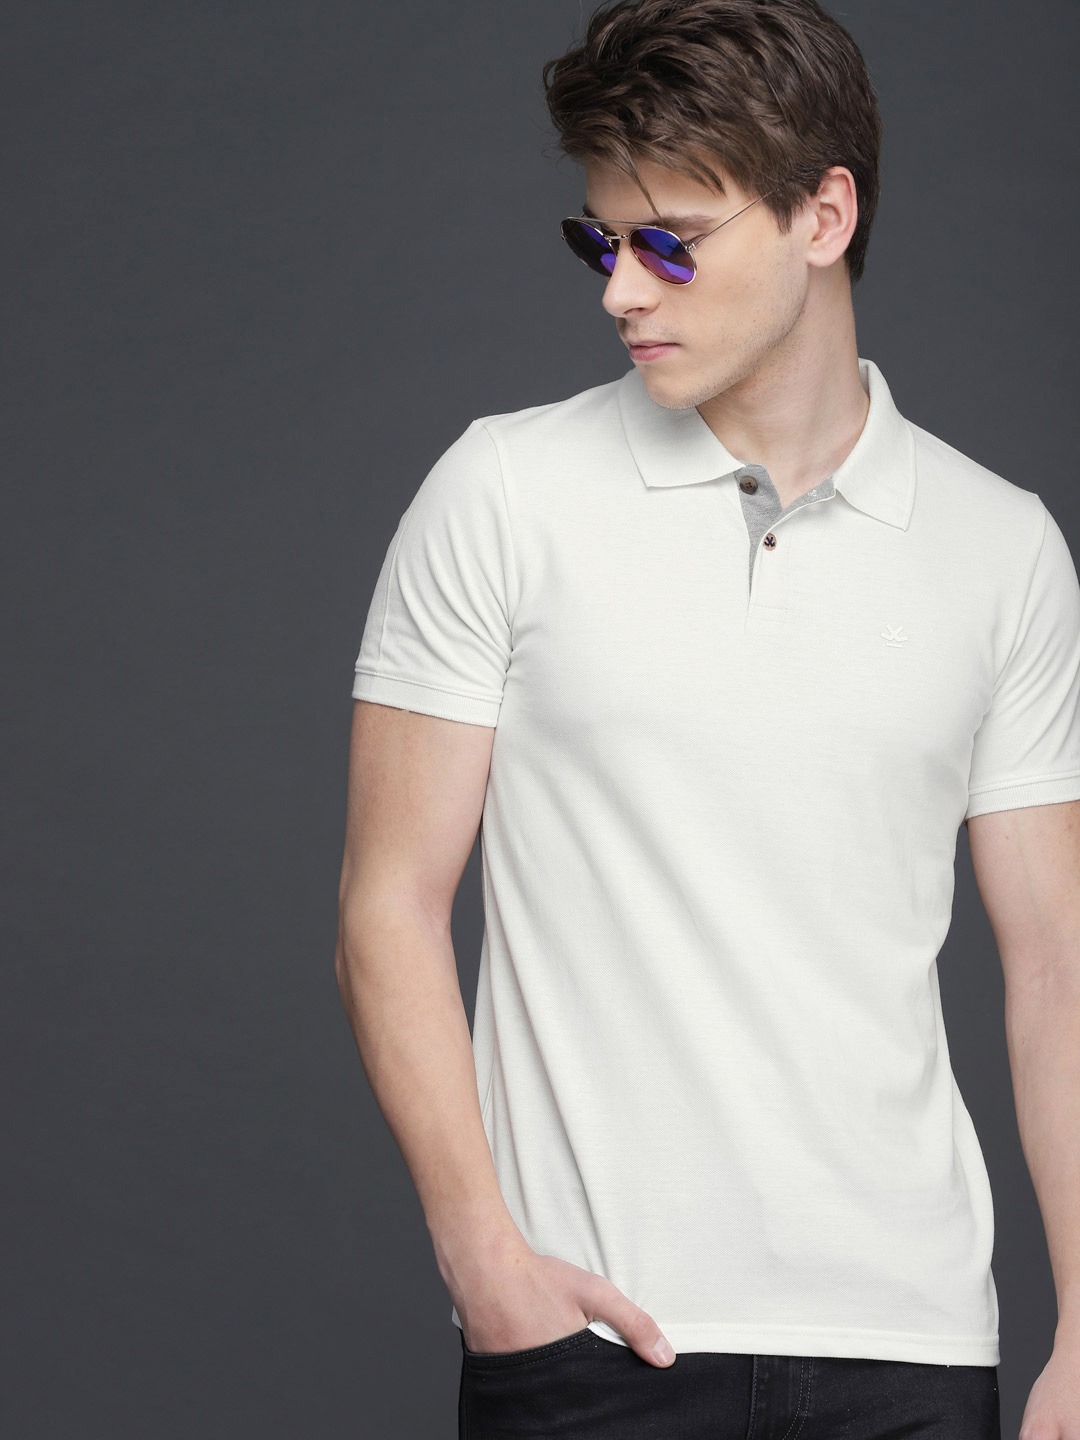 WROGN Men White Solid Slim Fit Polo T-shirt